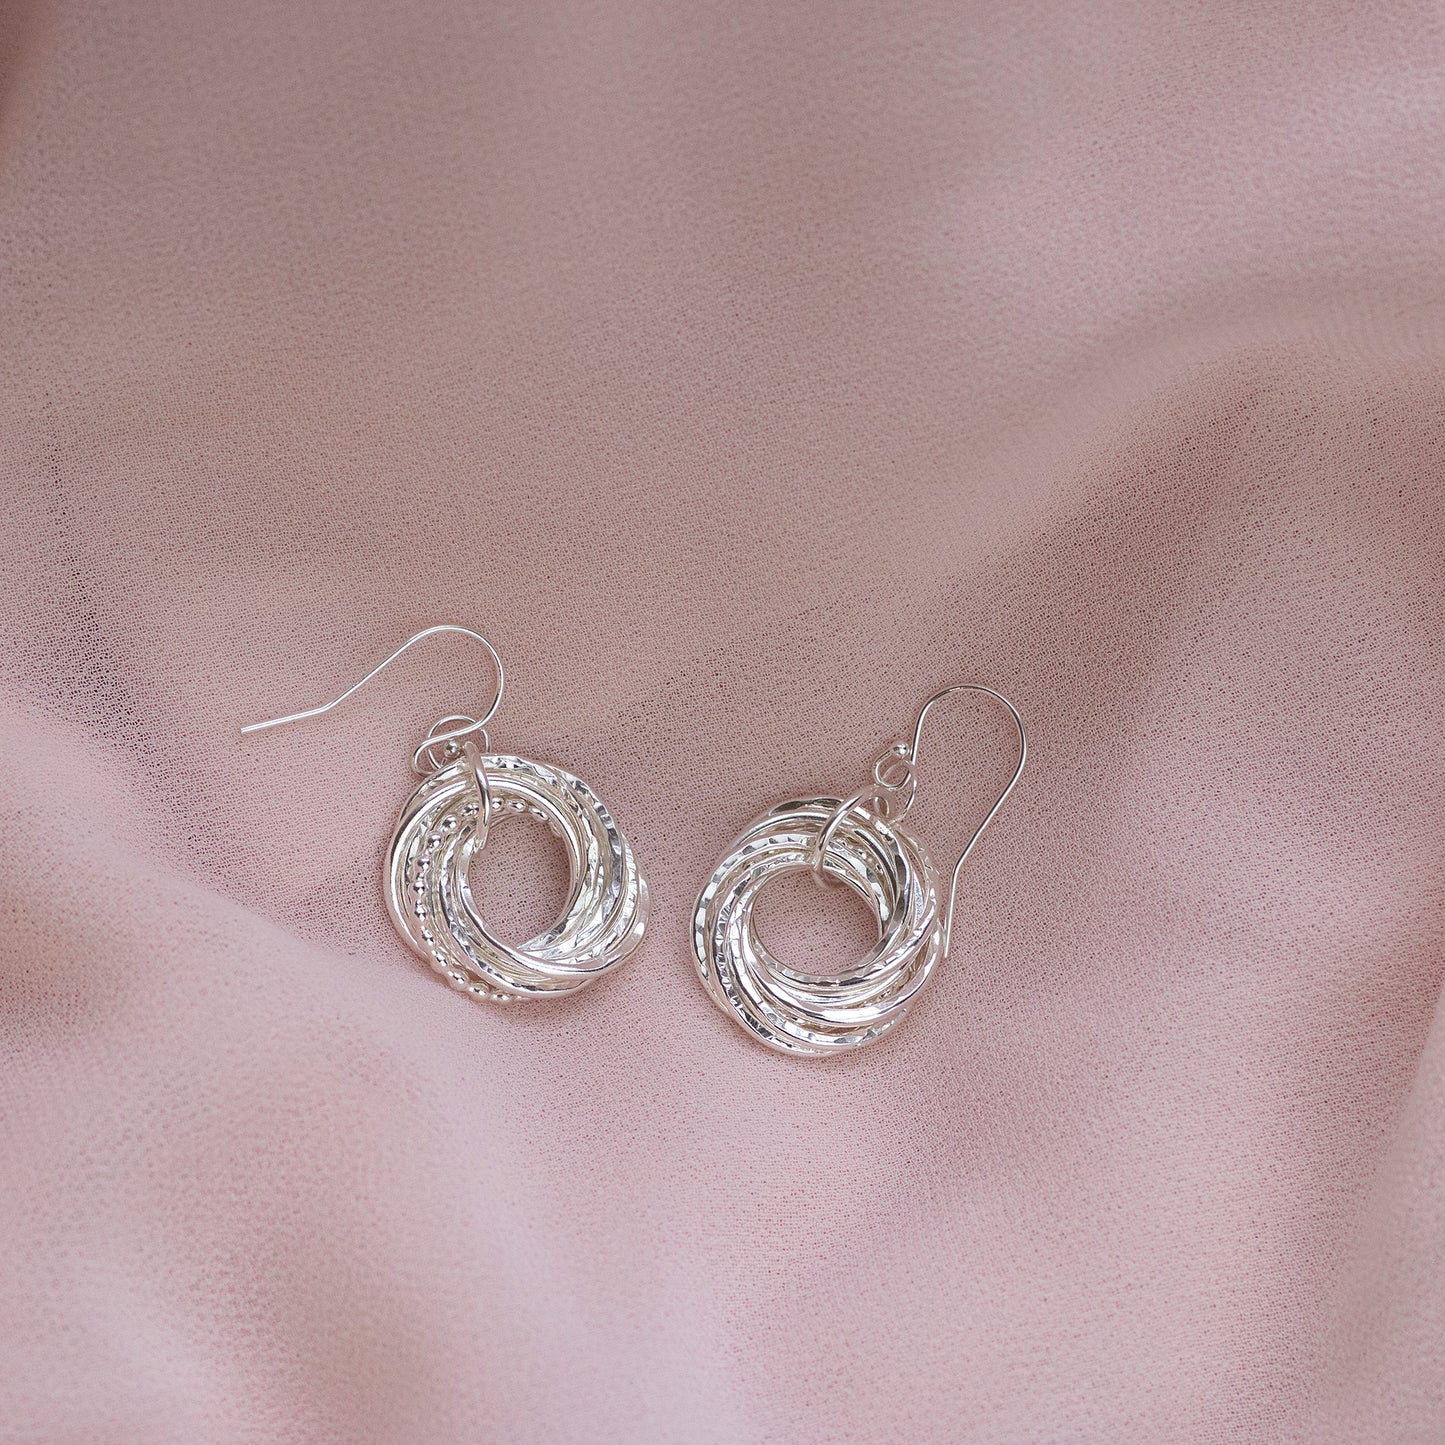 90th Birthday Earrings - The Original 9 Links for 9 Decades Earrings - Petite Silver